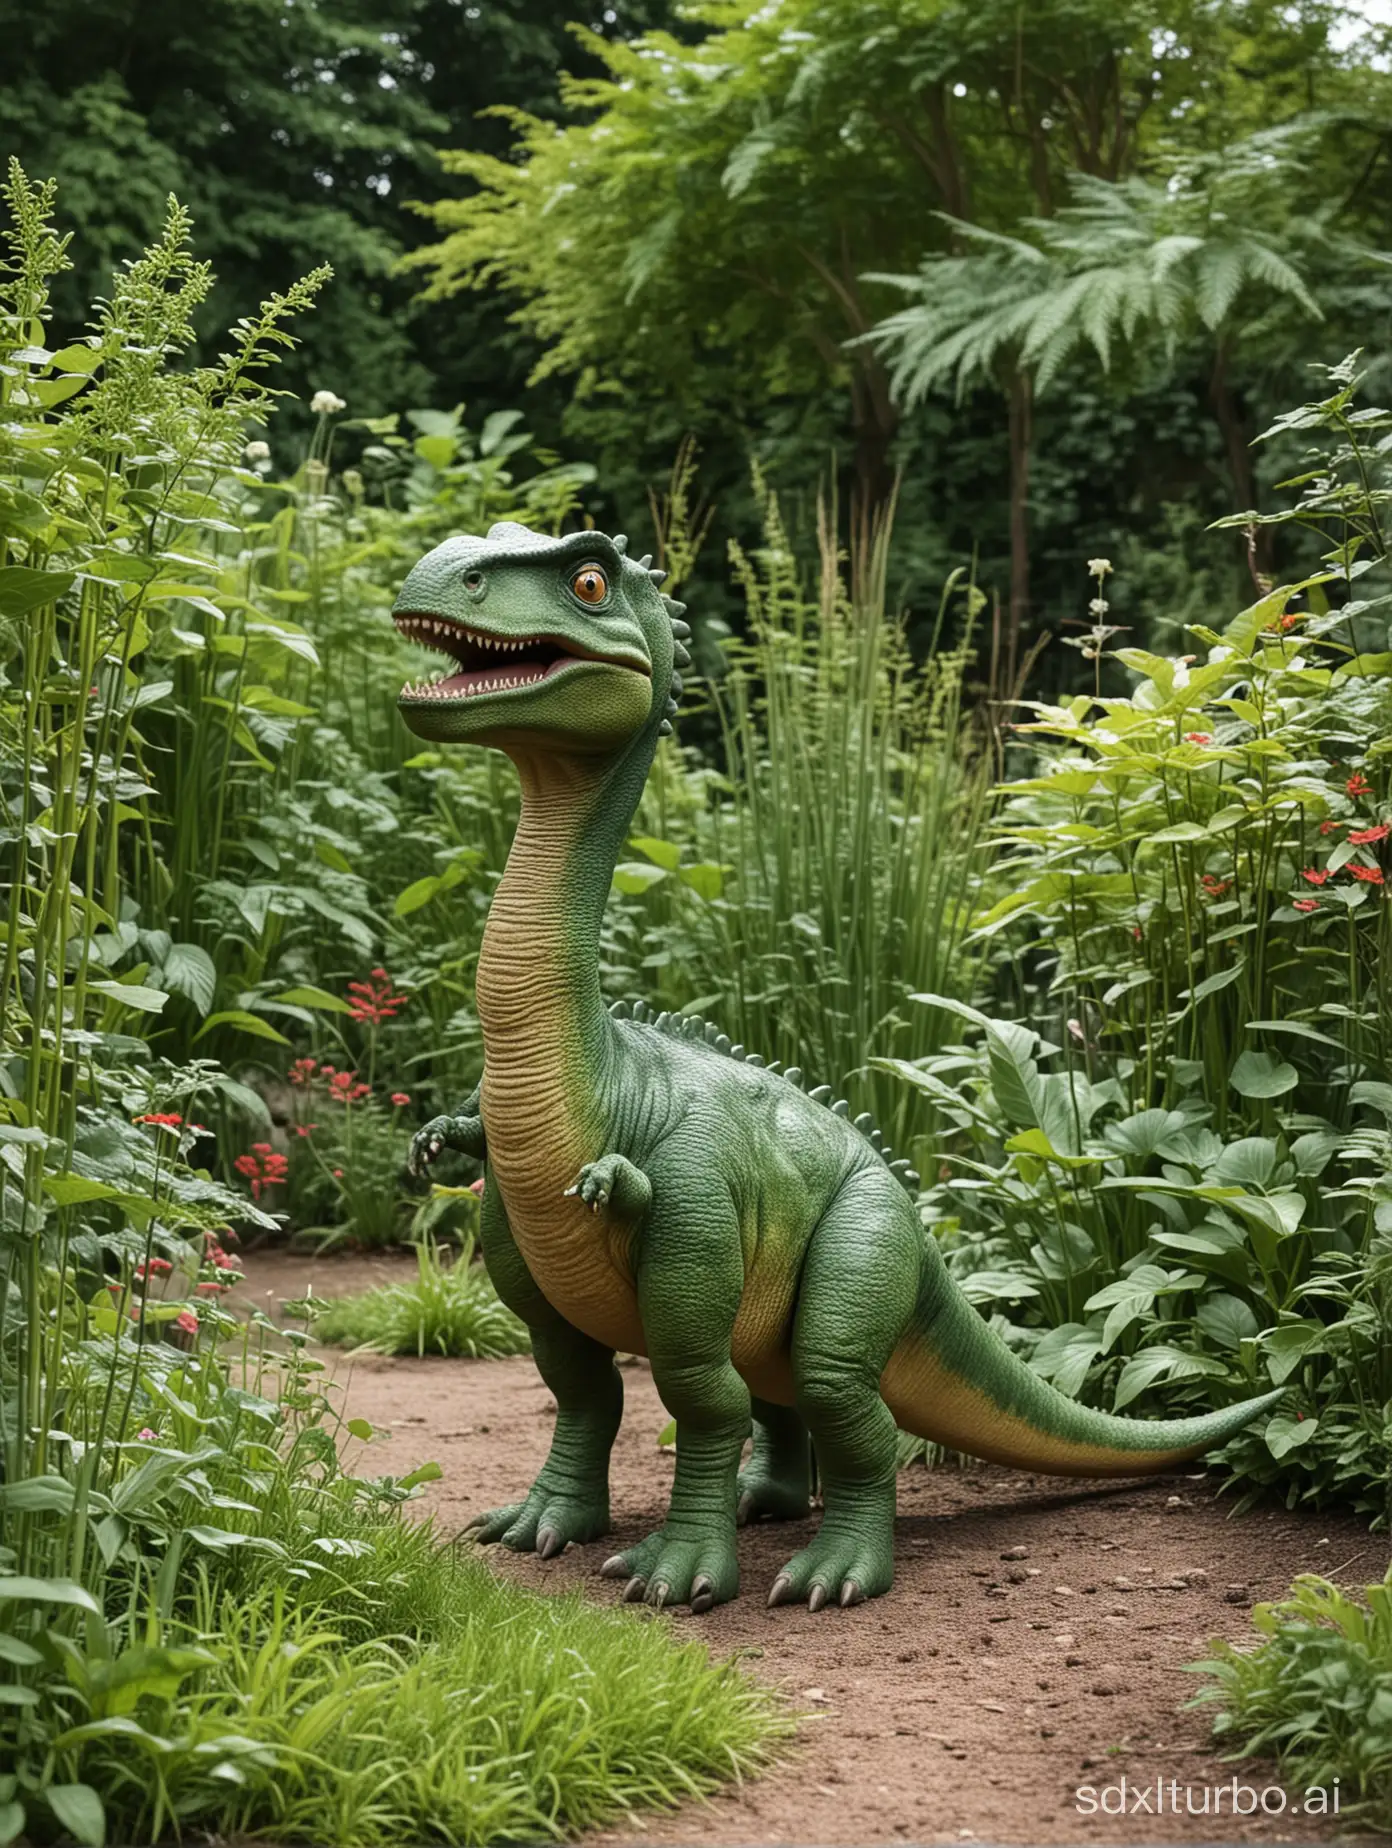 In the garden, there is a lovely dinosaur.